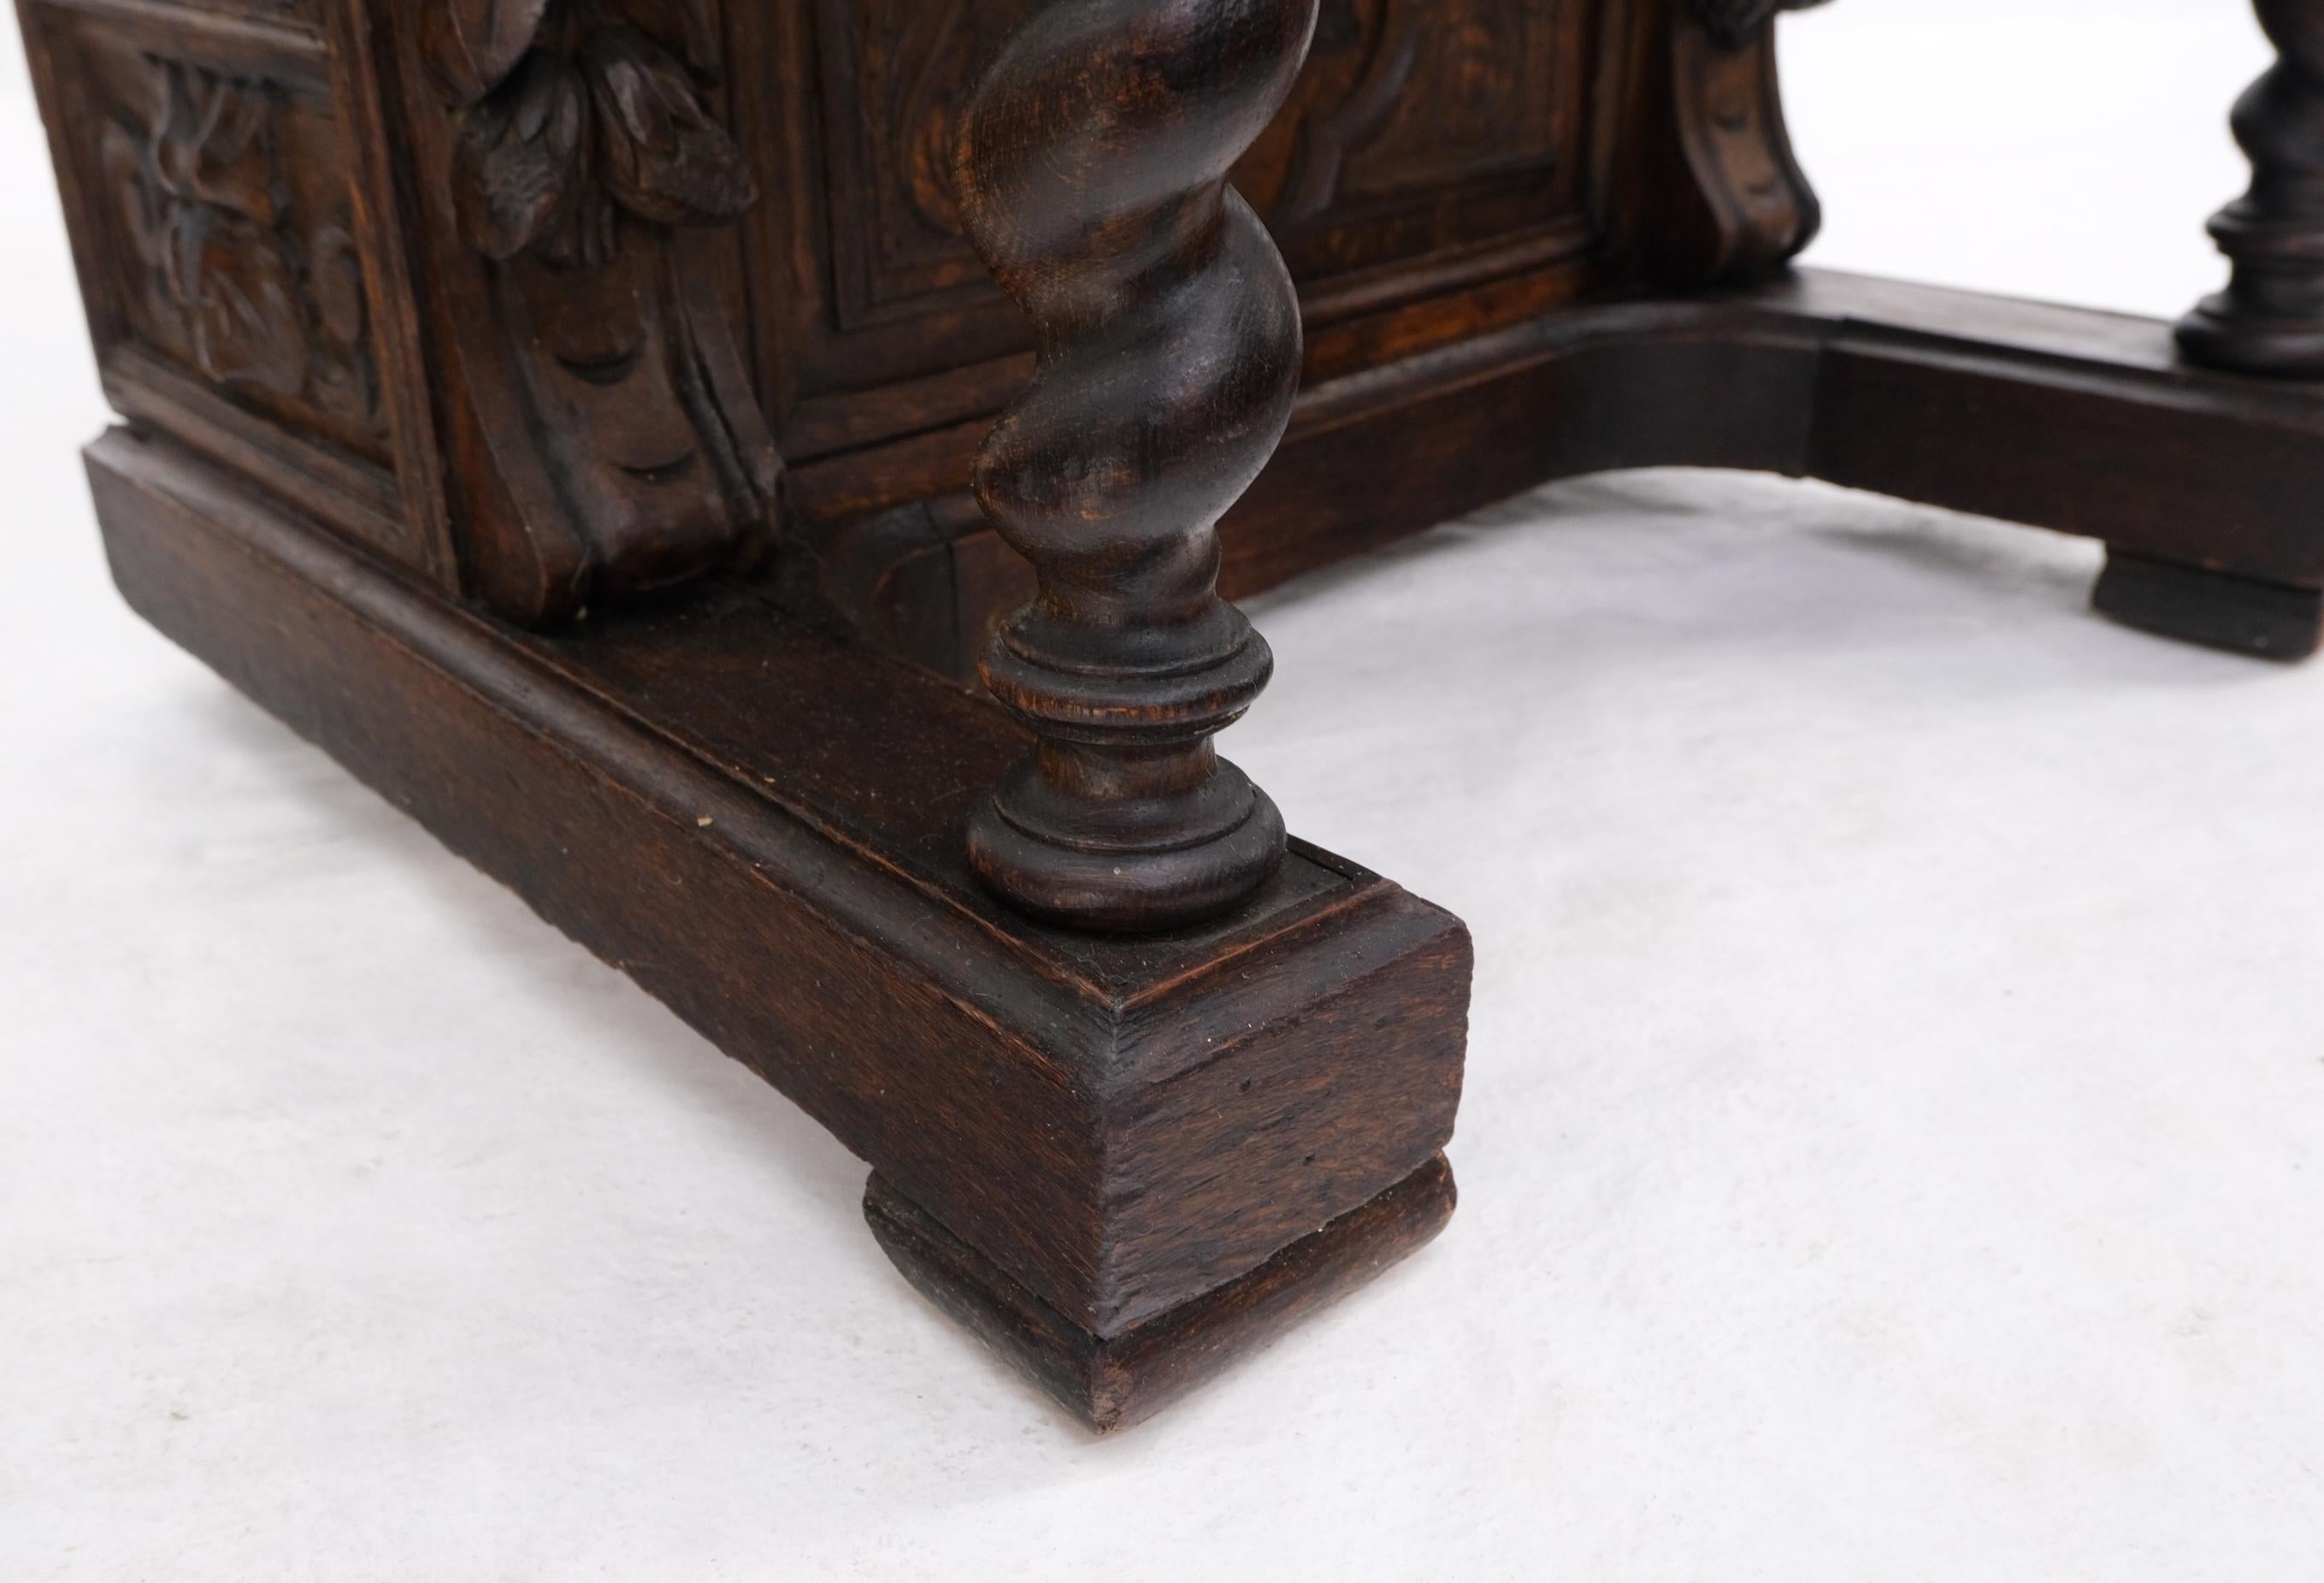 19th Century Davenport Heavily Carved Oak Desk w/ Rope Twist Supports 4 Drawers For Sale 7